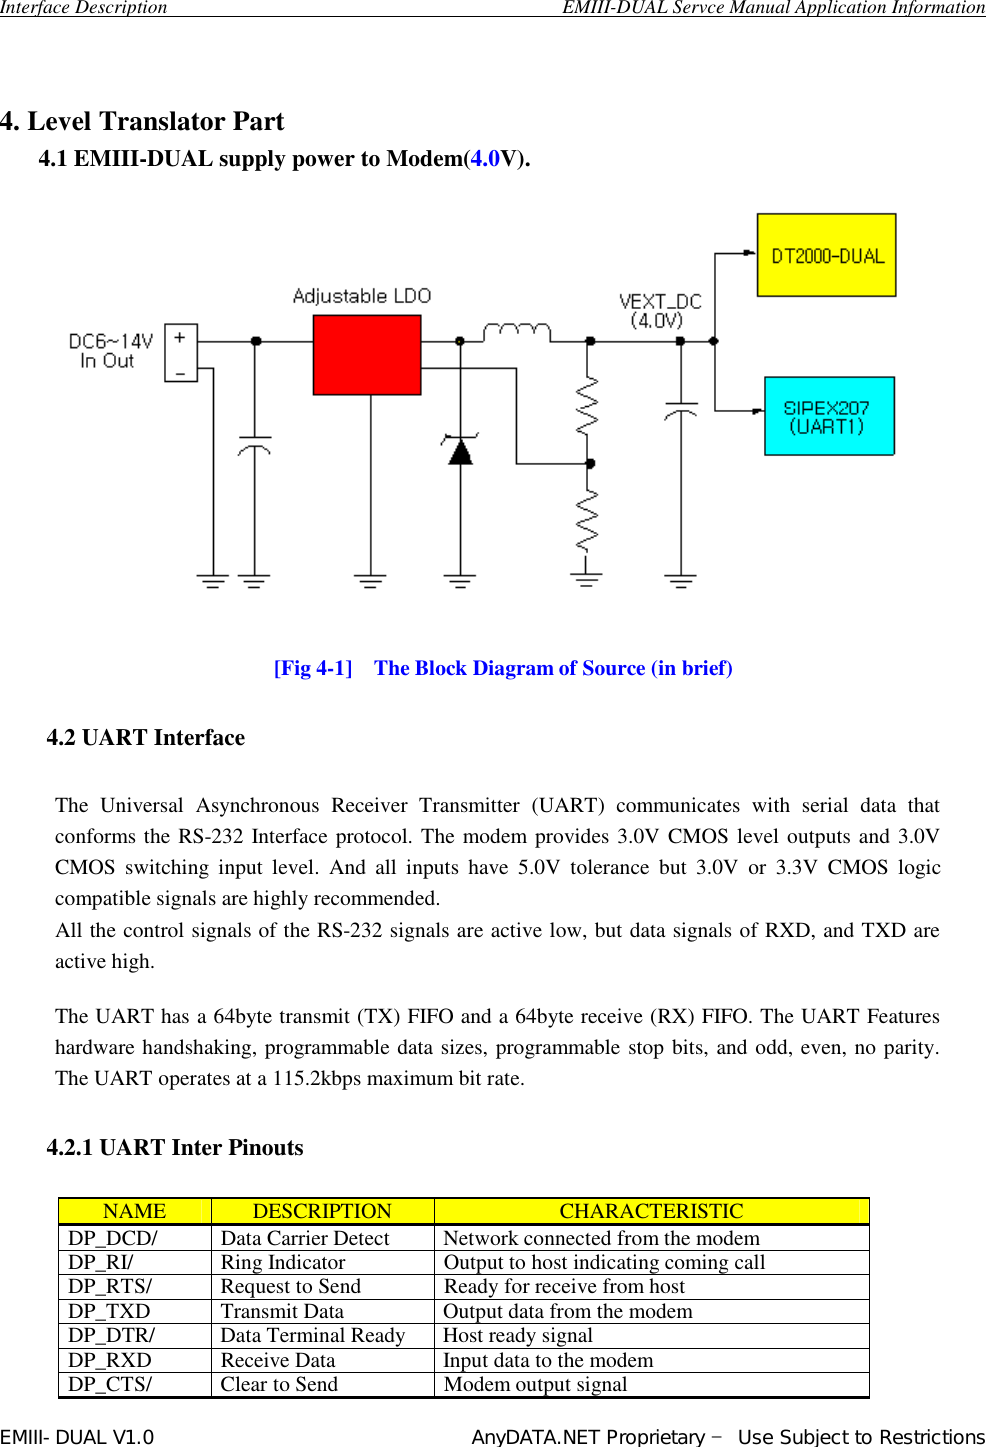  Interface Description                                        EMIII-DUAL Servce Manual Application Information EMIII-DUAL V1.0                                 AnyDATA.NET Proprietary – Use Subject to Restrictions    4. Level Translator Part 4.1 EMIII-DUAL supply power to Modem(4.0V).     [Fig 4-1]  The Block Diagram of Source (in brief)  4.2 UART Interface  The Universal Asynchronous Receiver Transmitter (UART) communicates with serial data that conforms the RS-232 Interface protocol. The modem provides 3.0V CMOS level outputs and 3.0V CMOS switching input level. And all inputs have 5.0V tolerance but 3.0V or 3.3V CMOS logic compatible signals are highly recommended.  All the control signals of the RS-232 signals are active low, but data signals of RXD, and TXD are active high.   The UART has a 64byte transmit (TX) FIFO and a 64byte receive (RX) FIFO. The UART Features hardware handshaking, programmable data sizes, programmable stop bits, and odd, even, no parity. The UART operates at a 115.2kbps maximum bit rate.  4.2.1 UART Inter Pinouts  NAME  DESCRIPTION  CHARACTERISTIC DP_DCD/ Data Carrier Detect Network connected from the modem DP_RI/ Ring Indicator Output to host indicating coming call DP_RTS/ Request to Send Ready for receive from host DP_TXD Transmit Data Output data from the modem DP_DTR/ Data Terminal Ready Host ready signal DP_RXD Receive Data Input data to the modem DP_CTS/ Clear to Send Modem output signal 